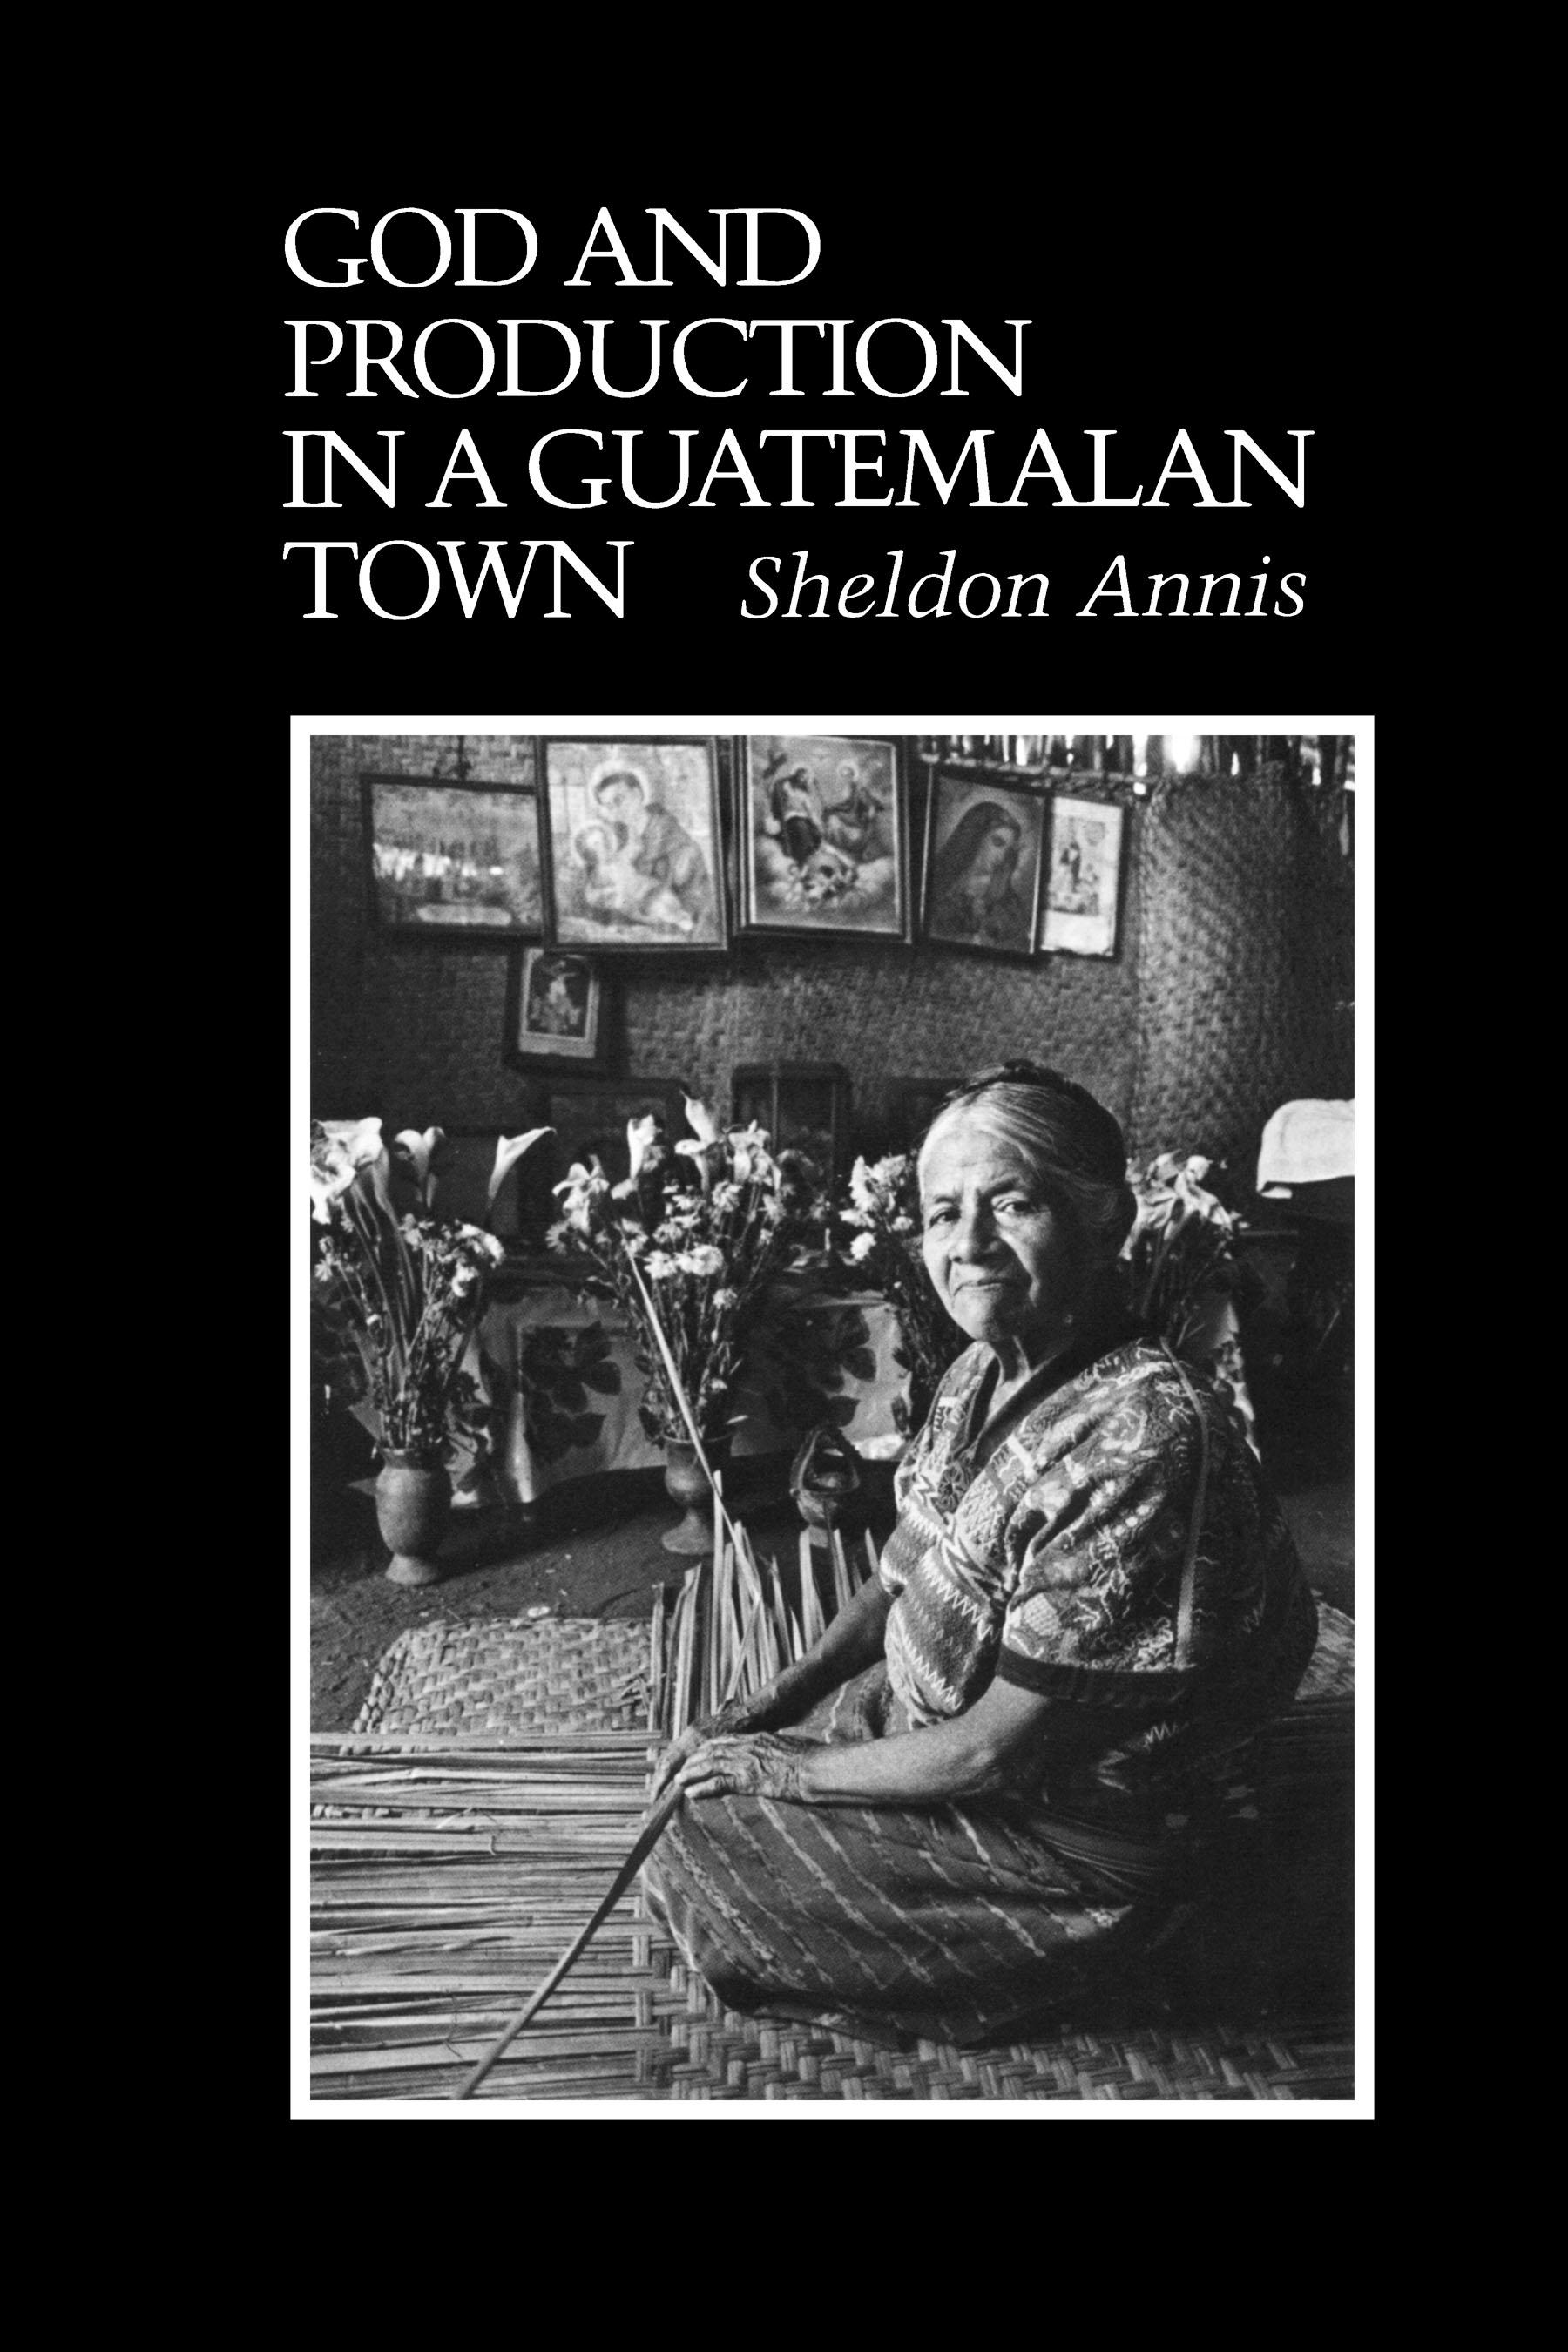 God and Production in a Guatemalan Town